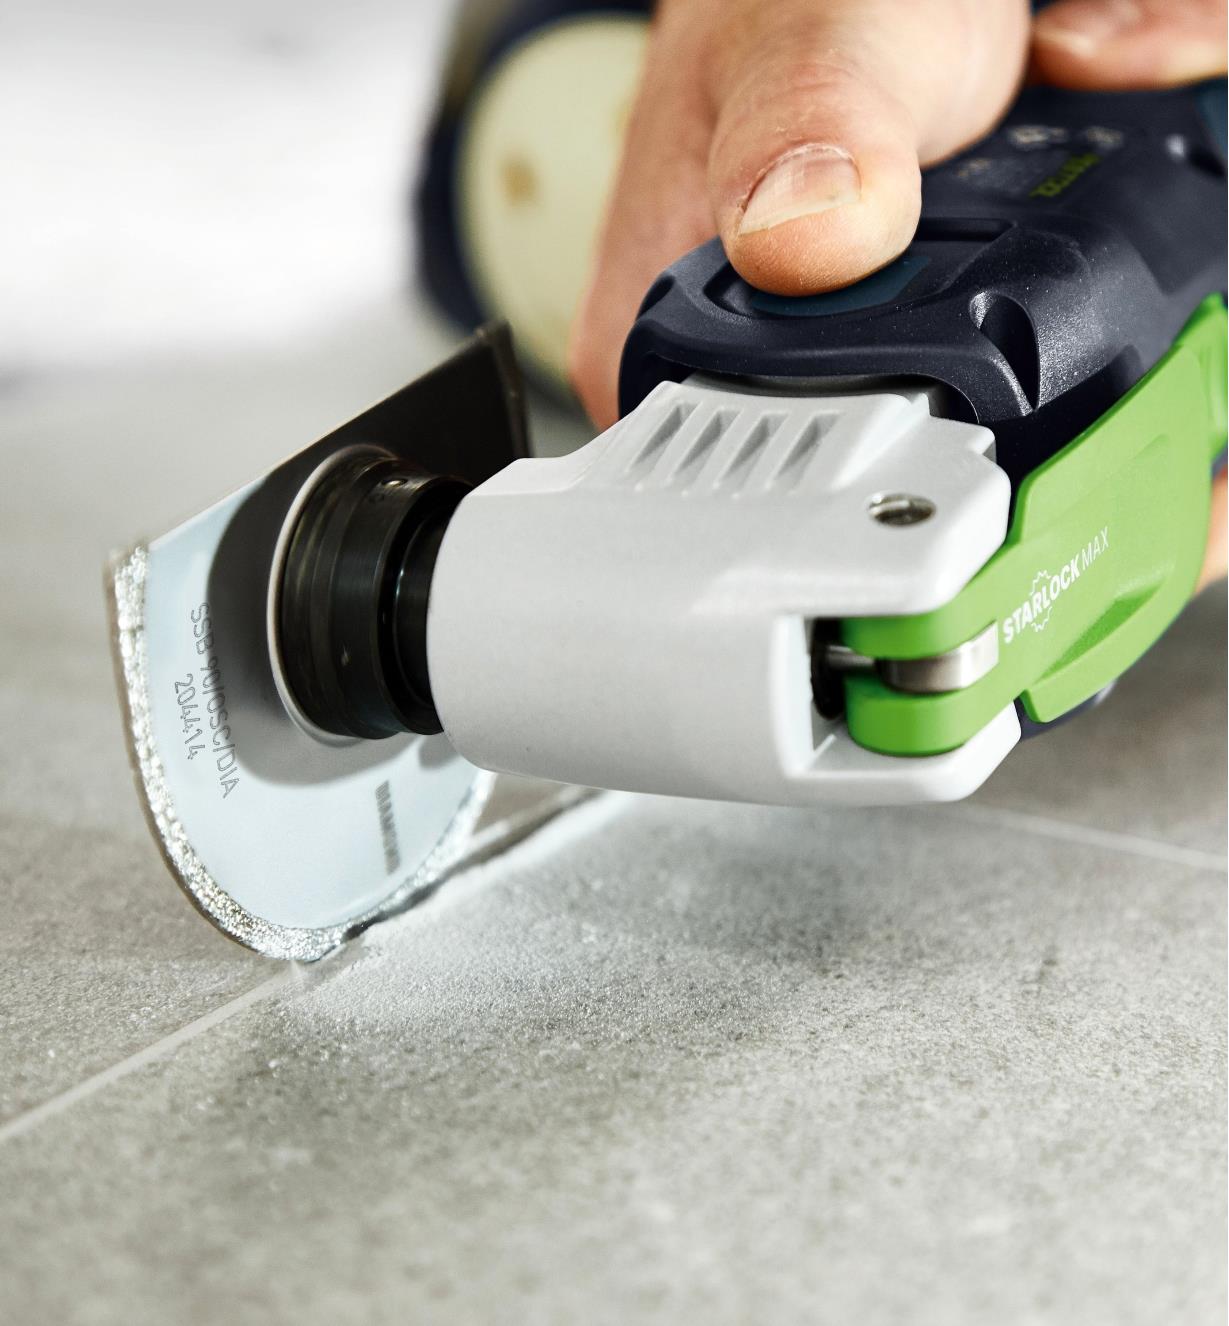 Using an OSC 18 oscillating tool equipped with the diamond saw blade to cut a joint in cement